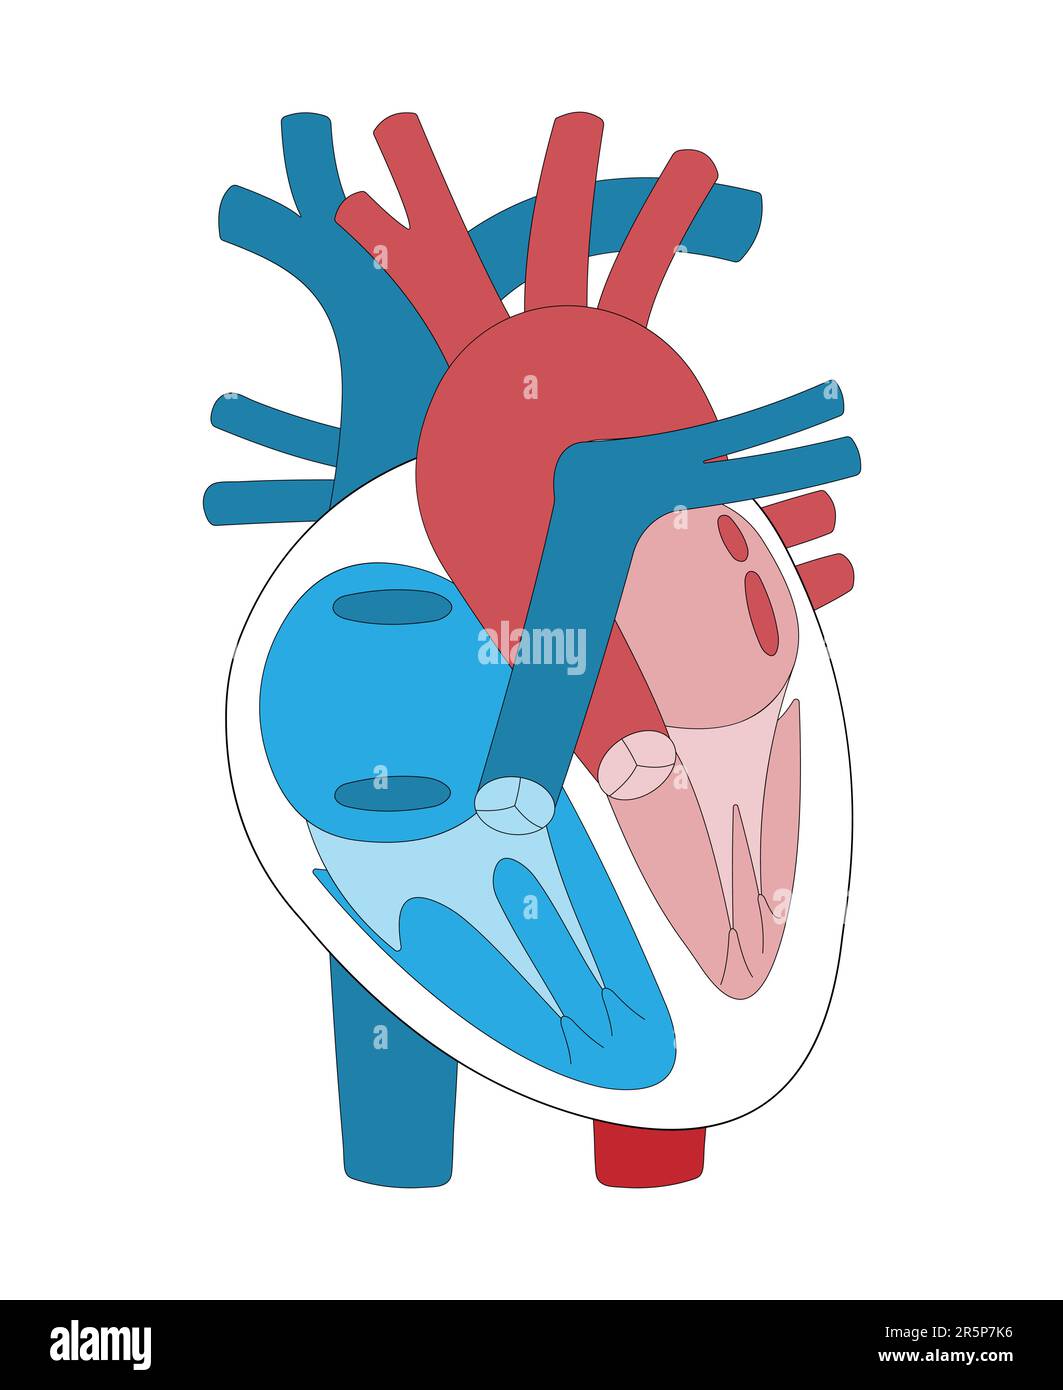 The illustration shows the chambers of the heart, the valves of the heart, and the blood vessels. Stock Vector